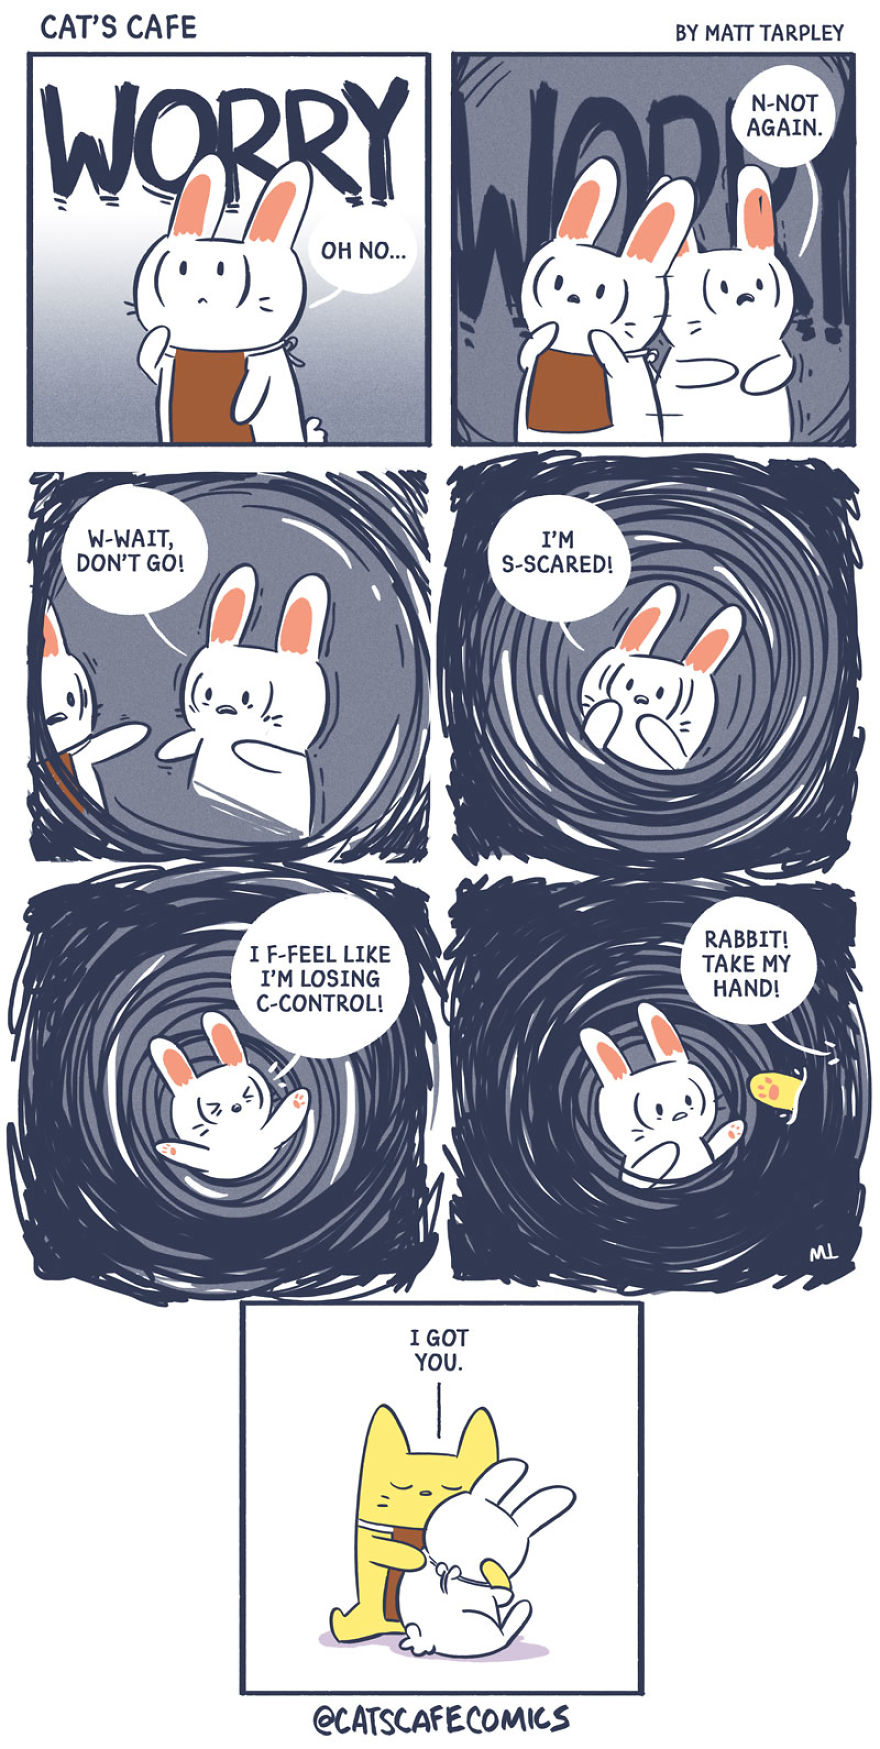 What It's Like To Have A Panic Attack Illustrated As A Wholesome Comic